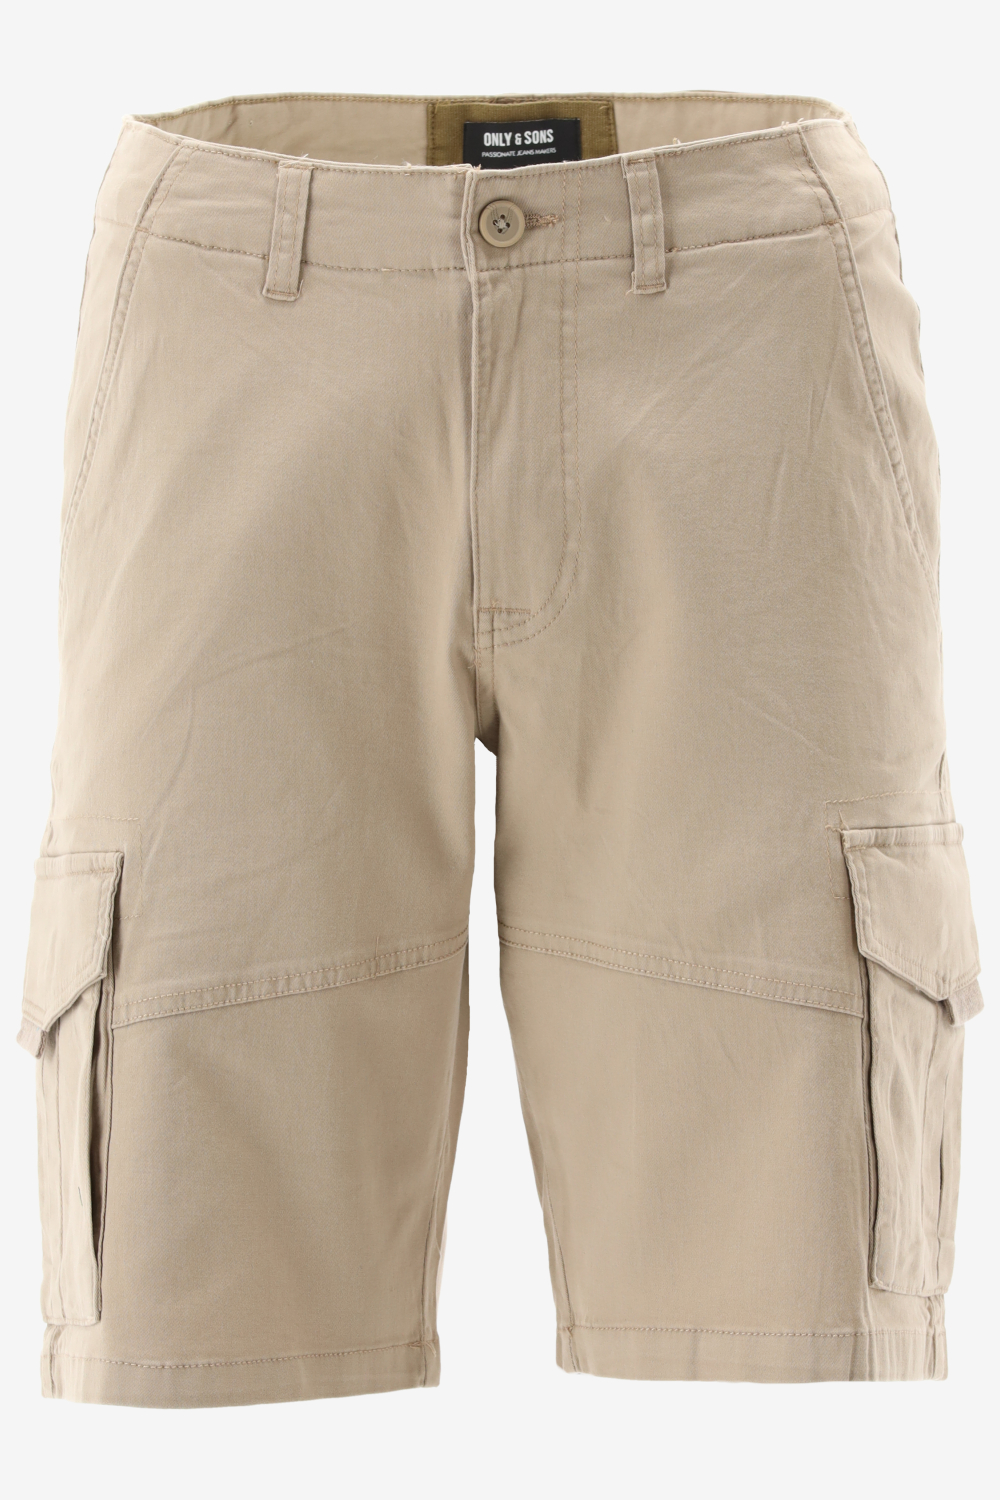 Only & Sons Short DEAN-MIKE LIFE 